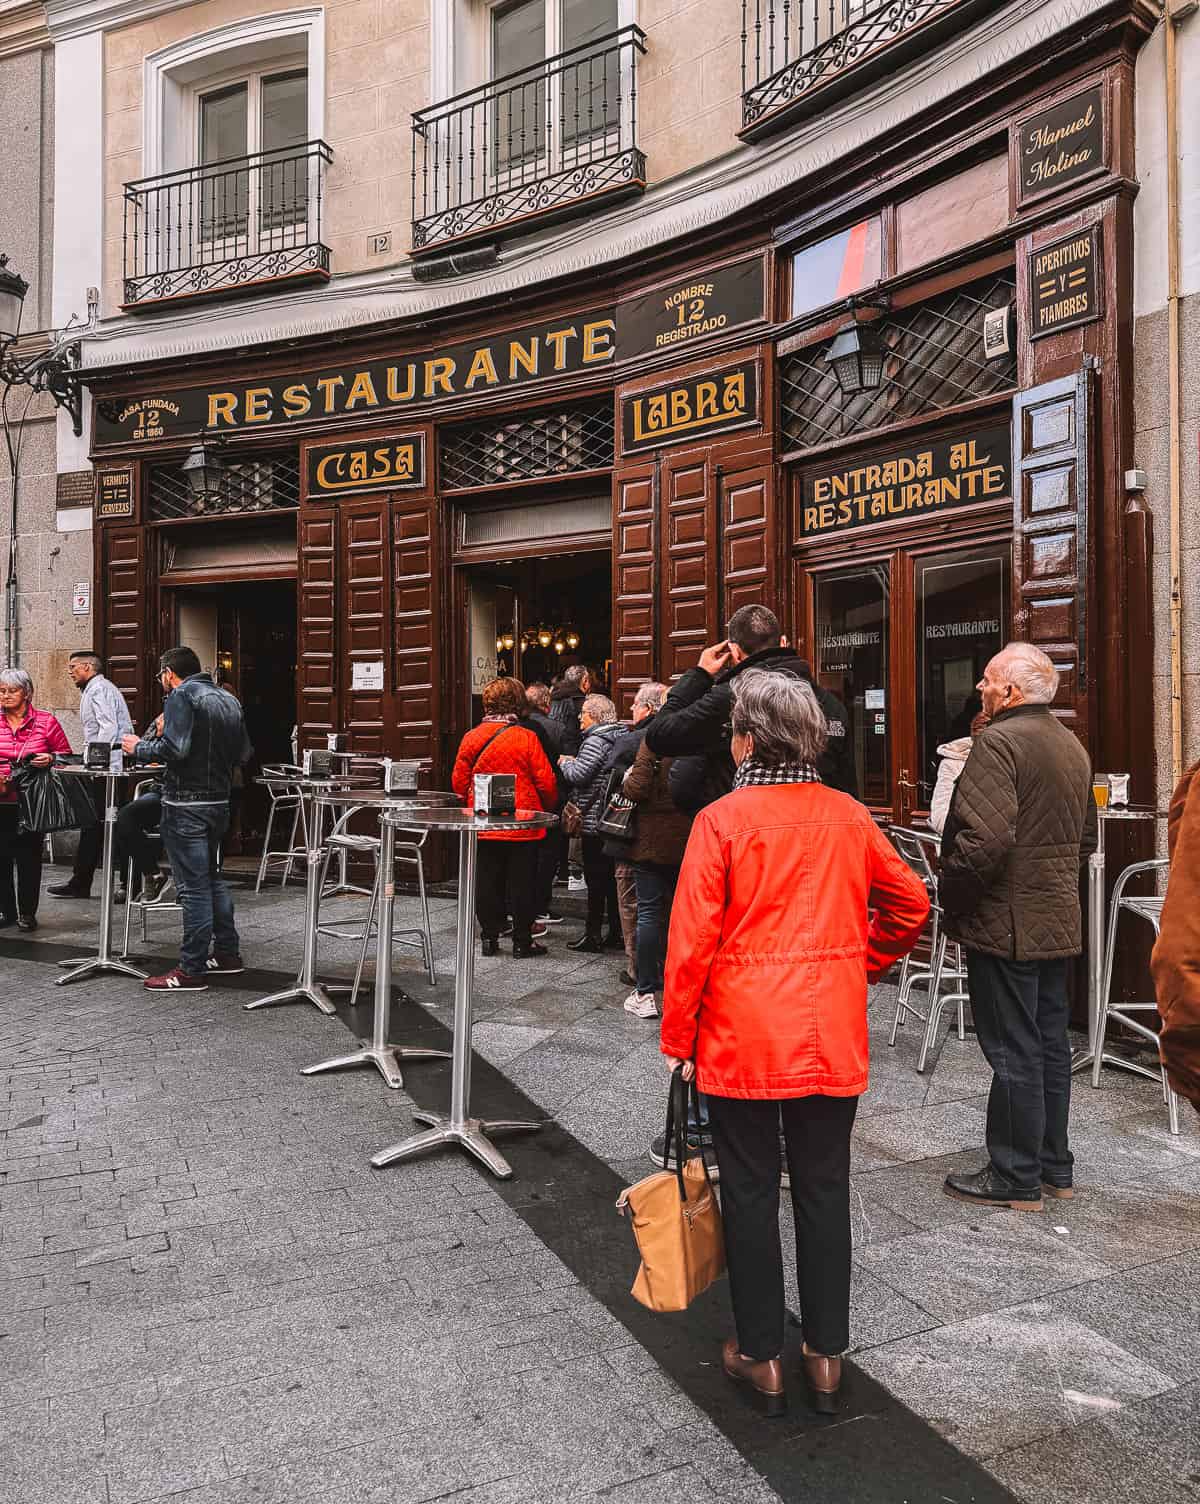 Busy street scene in front of Casa Labra Restaurant with people queueing outside, showcasing the popular and historic dining destination